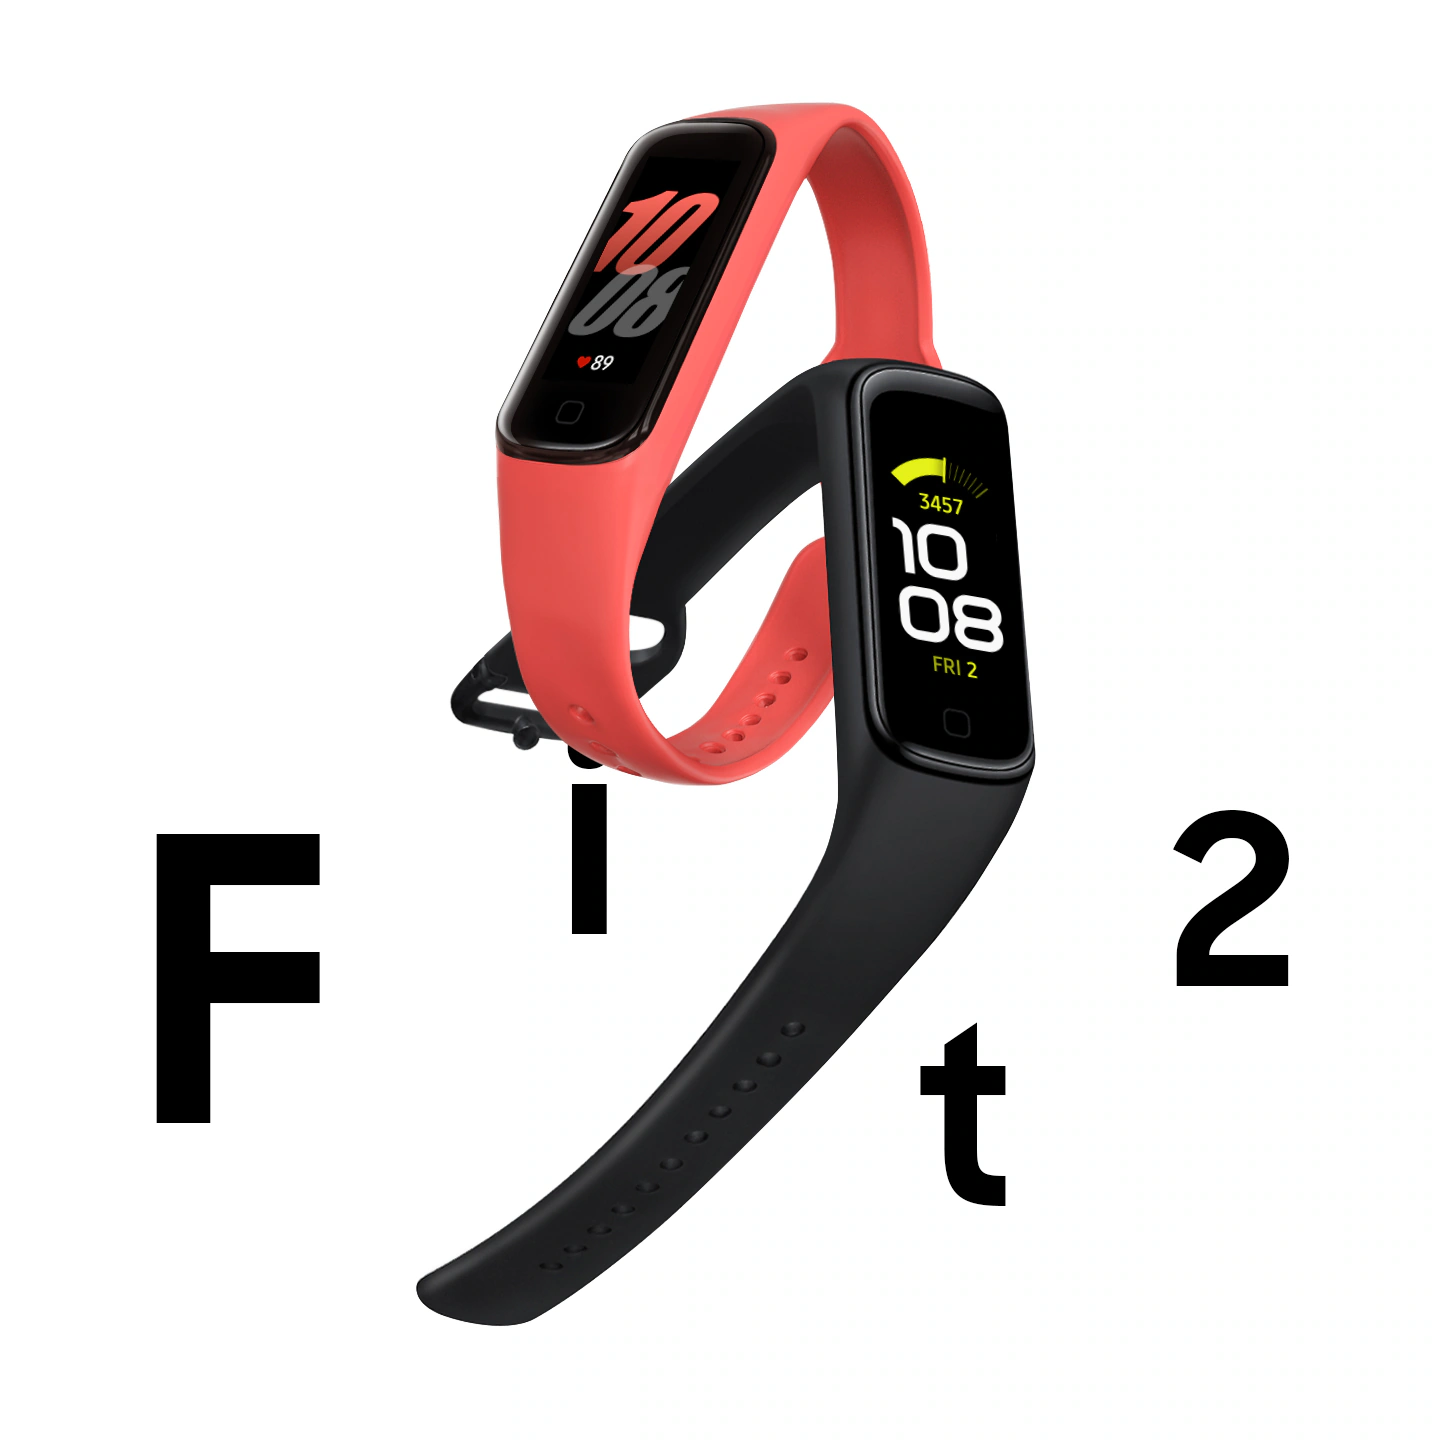 Samsung Galaxy Fit 2 receives practical new features in its latest update -   News